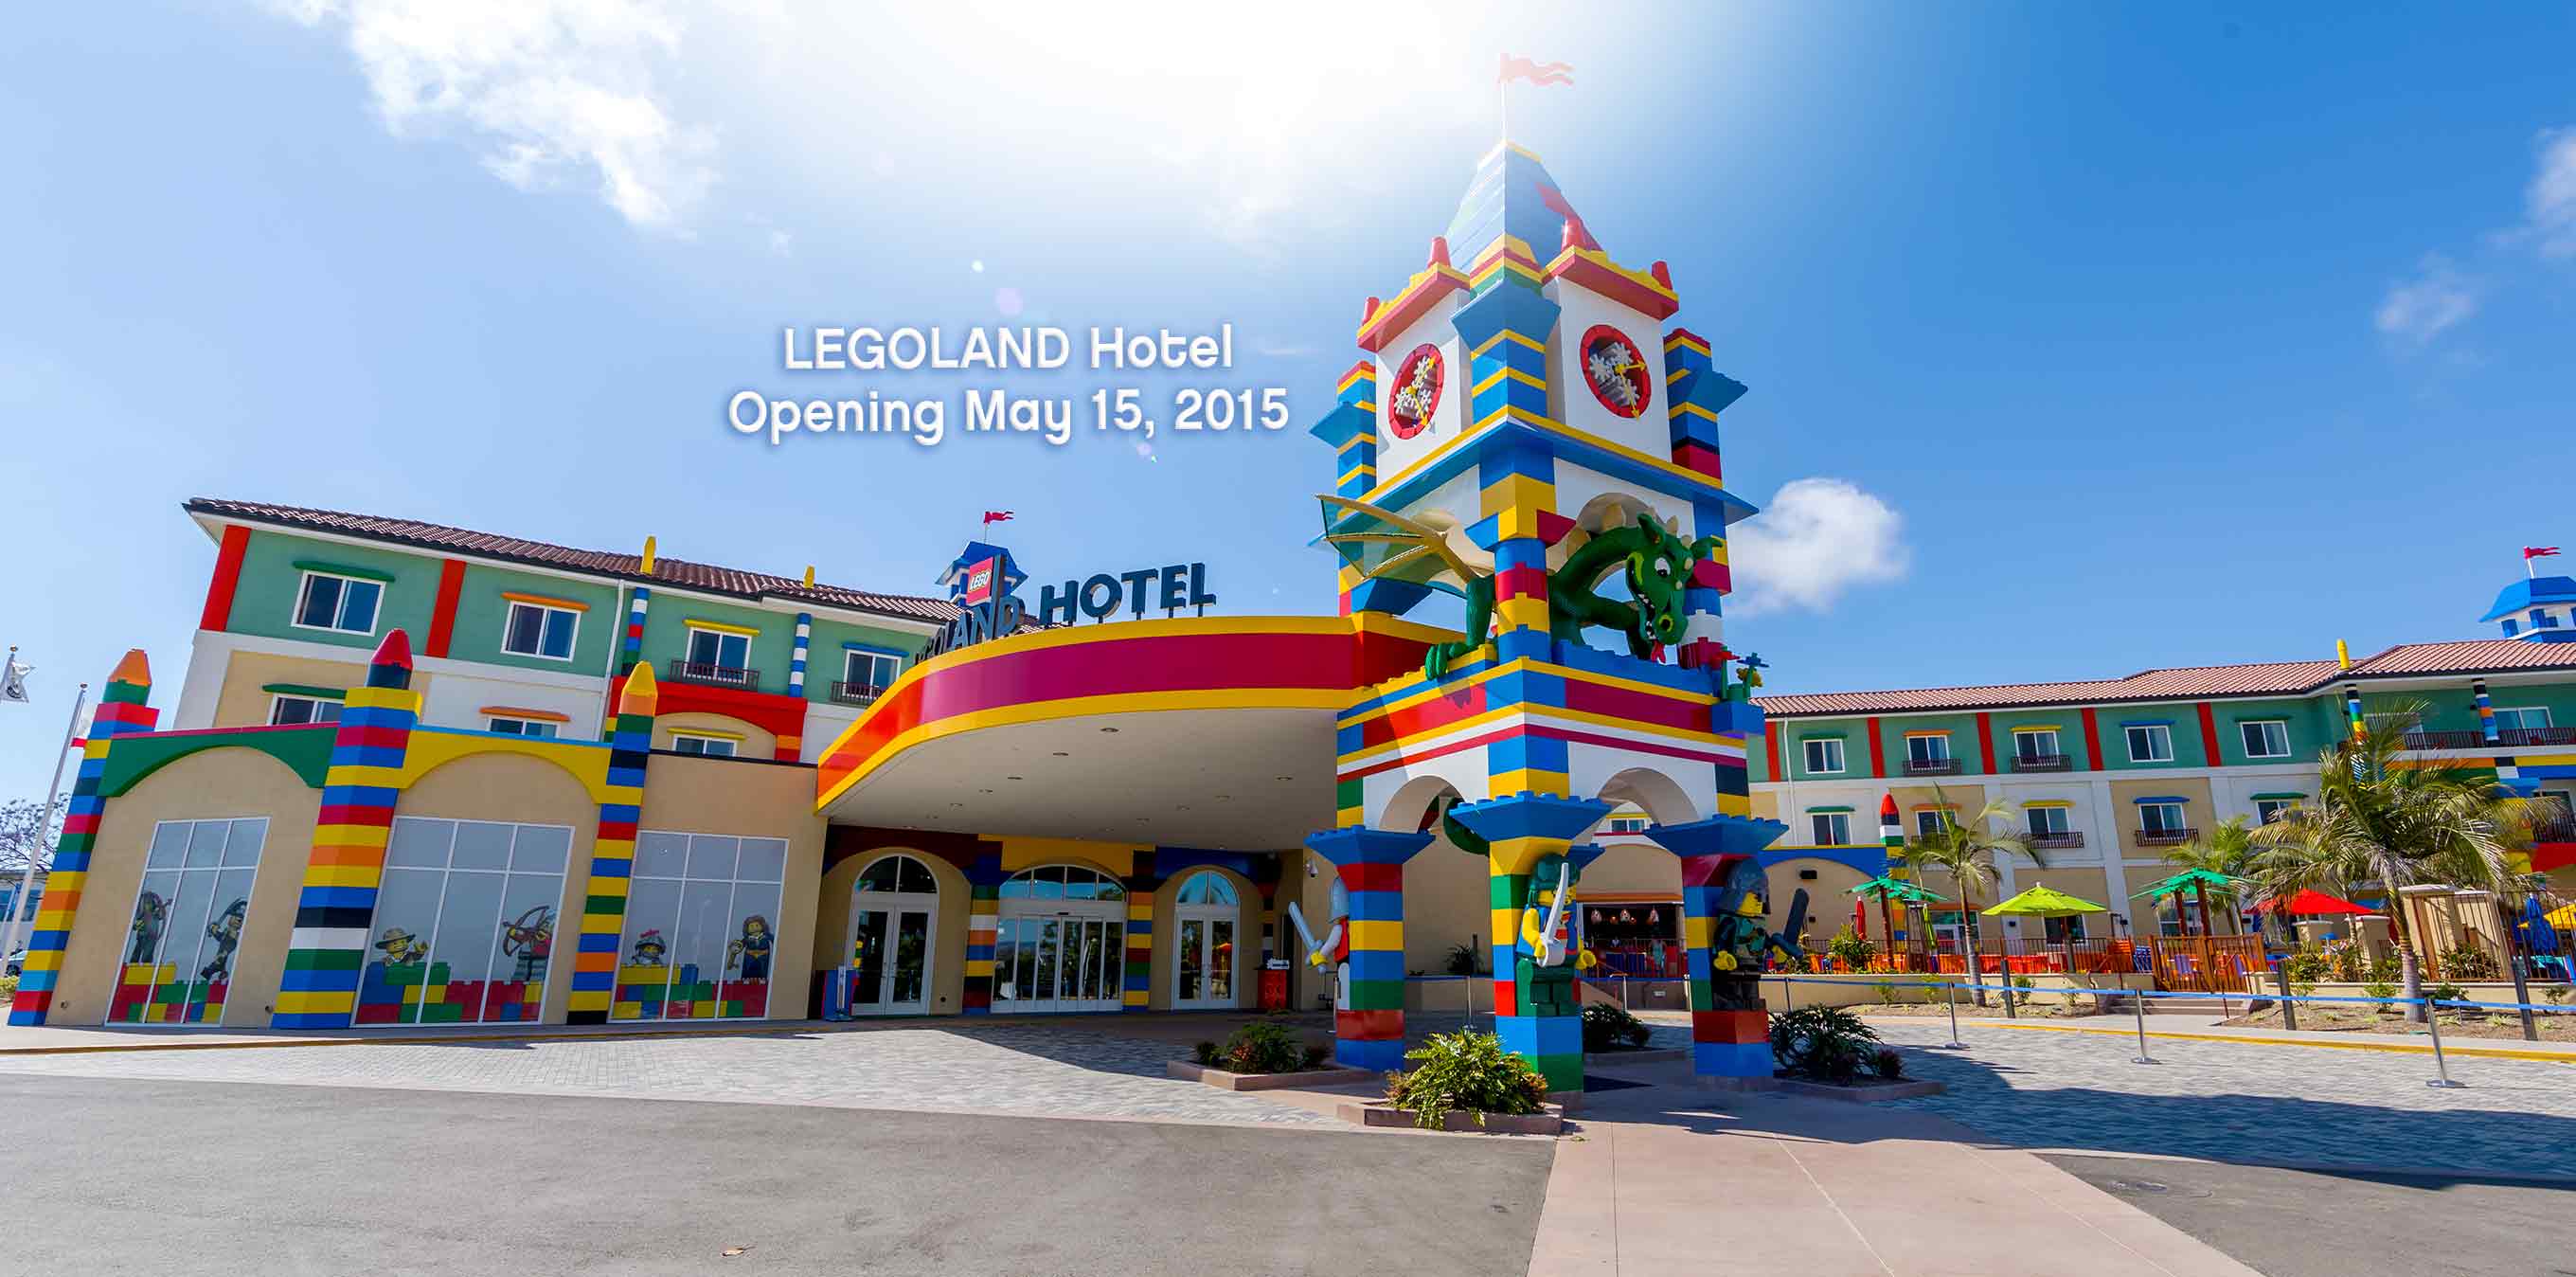 Everything Is Awesome At LEGOLAND's New Hotel in Florida